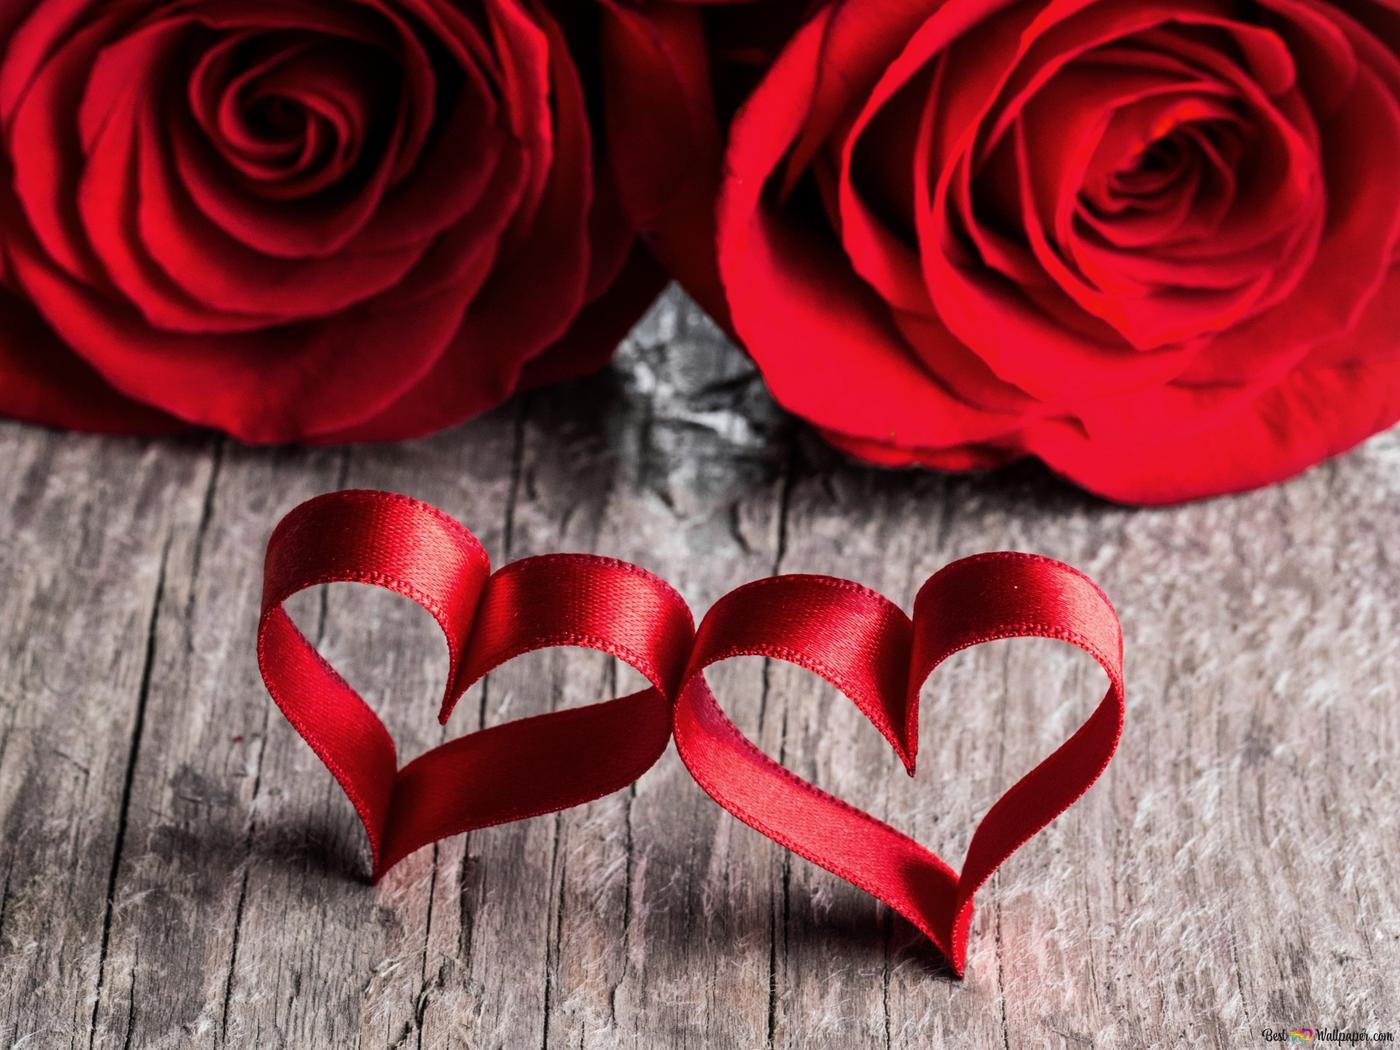 Valentine's day heart ribbons and the roses 2K wallpaper download